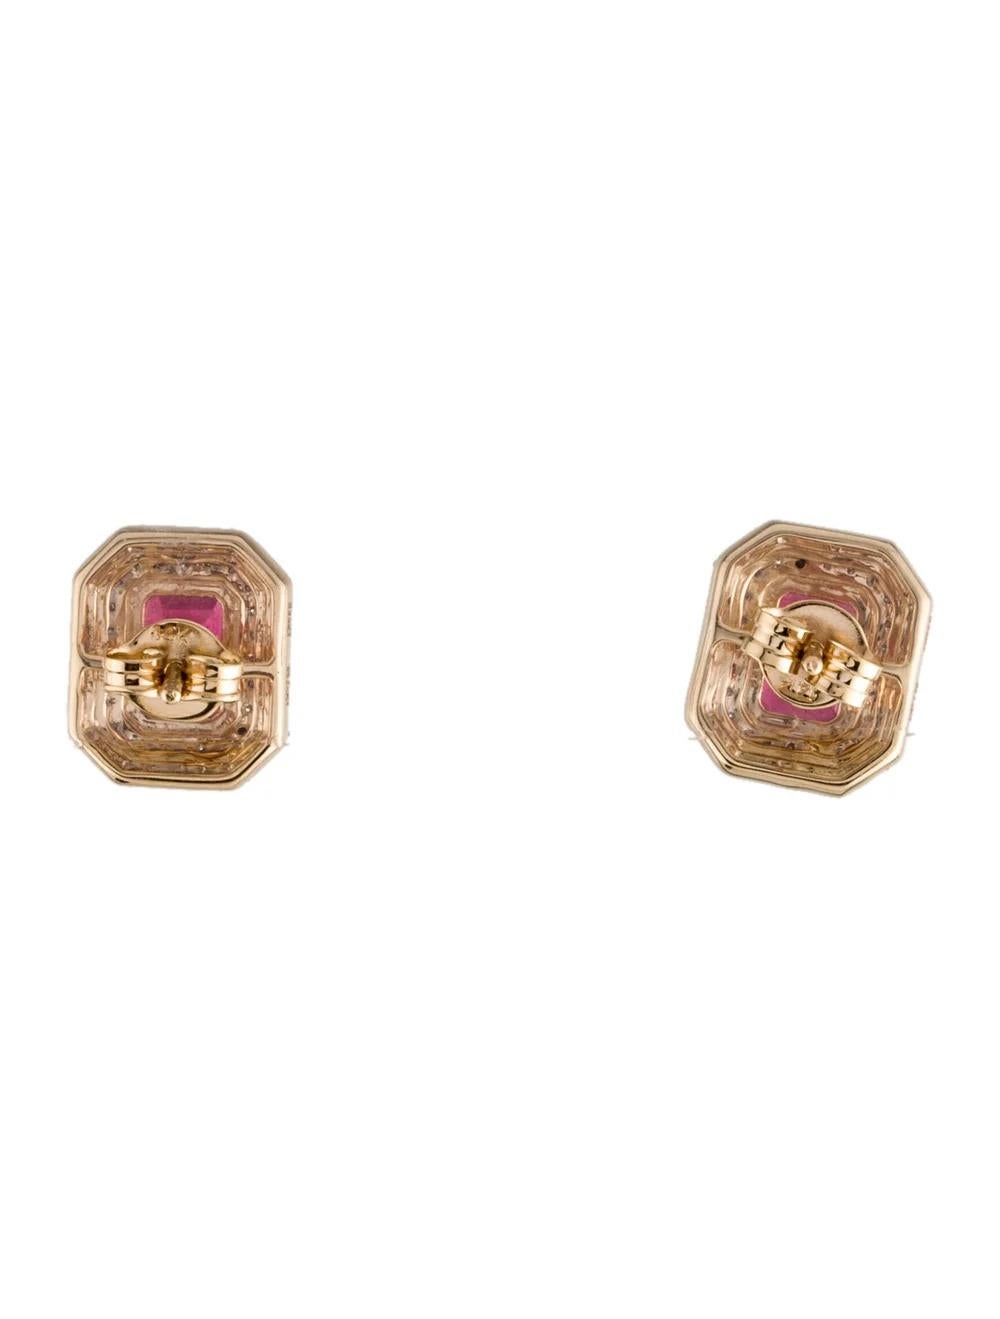 14K Tourmaline Diamond Stud Earrings - Vintage Style Jewelry, Statement Piece In New Condition For Sale In Holtsville, NY